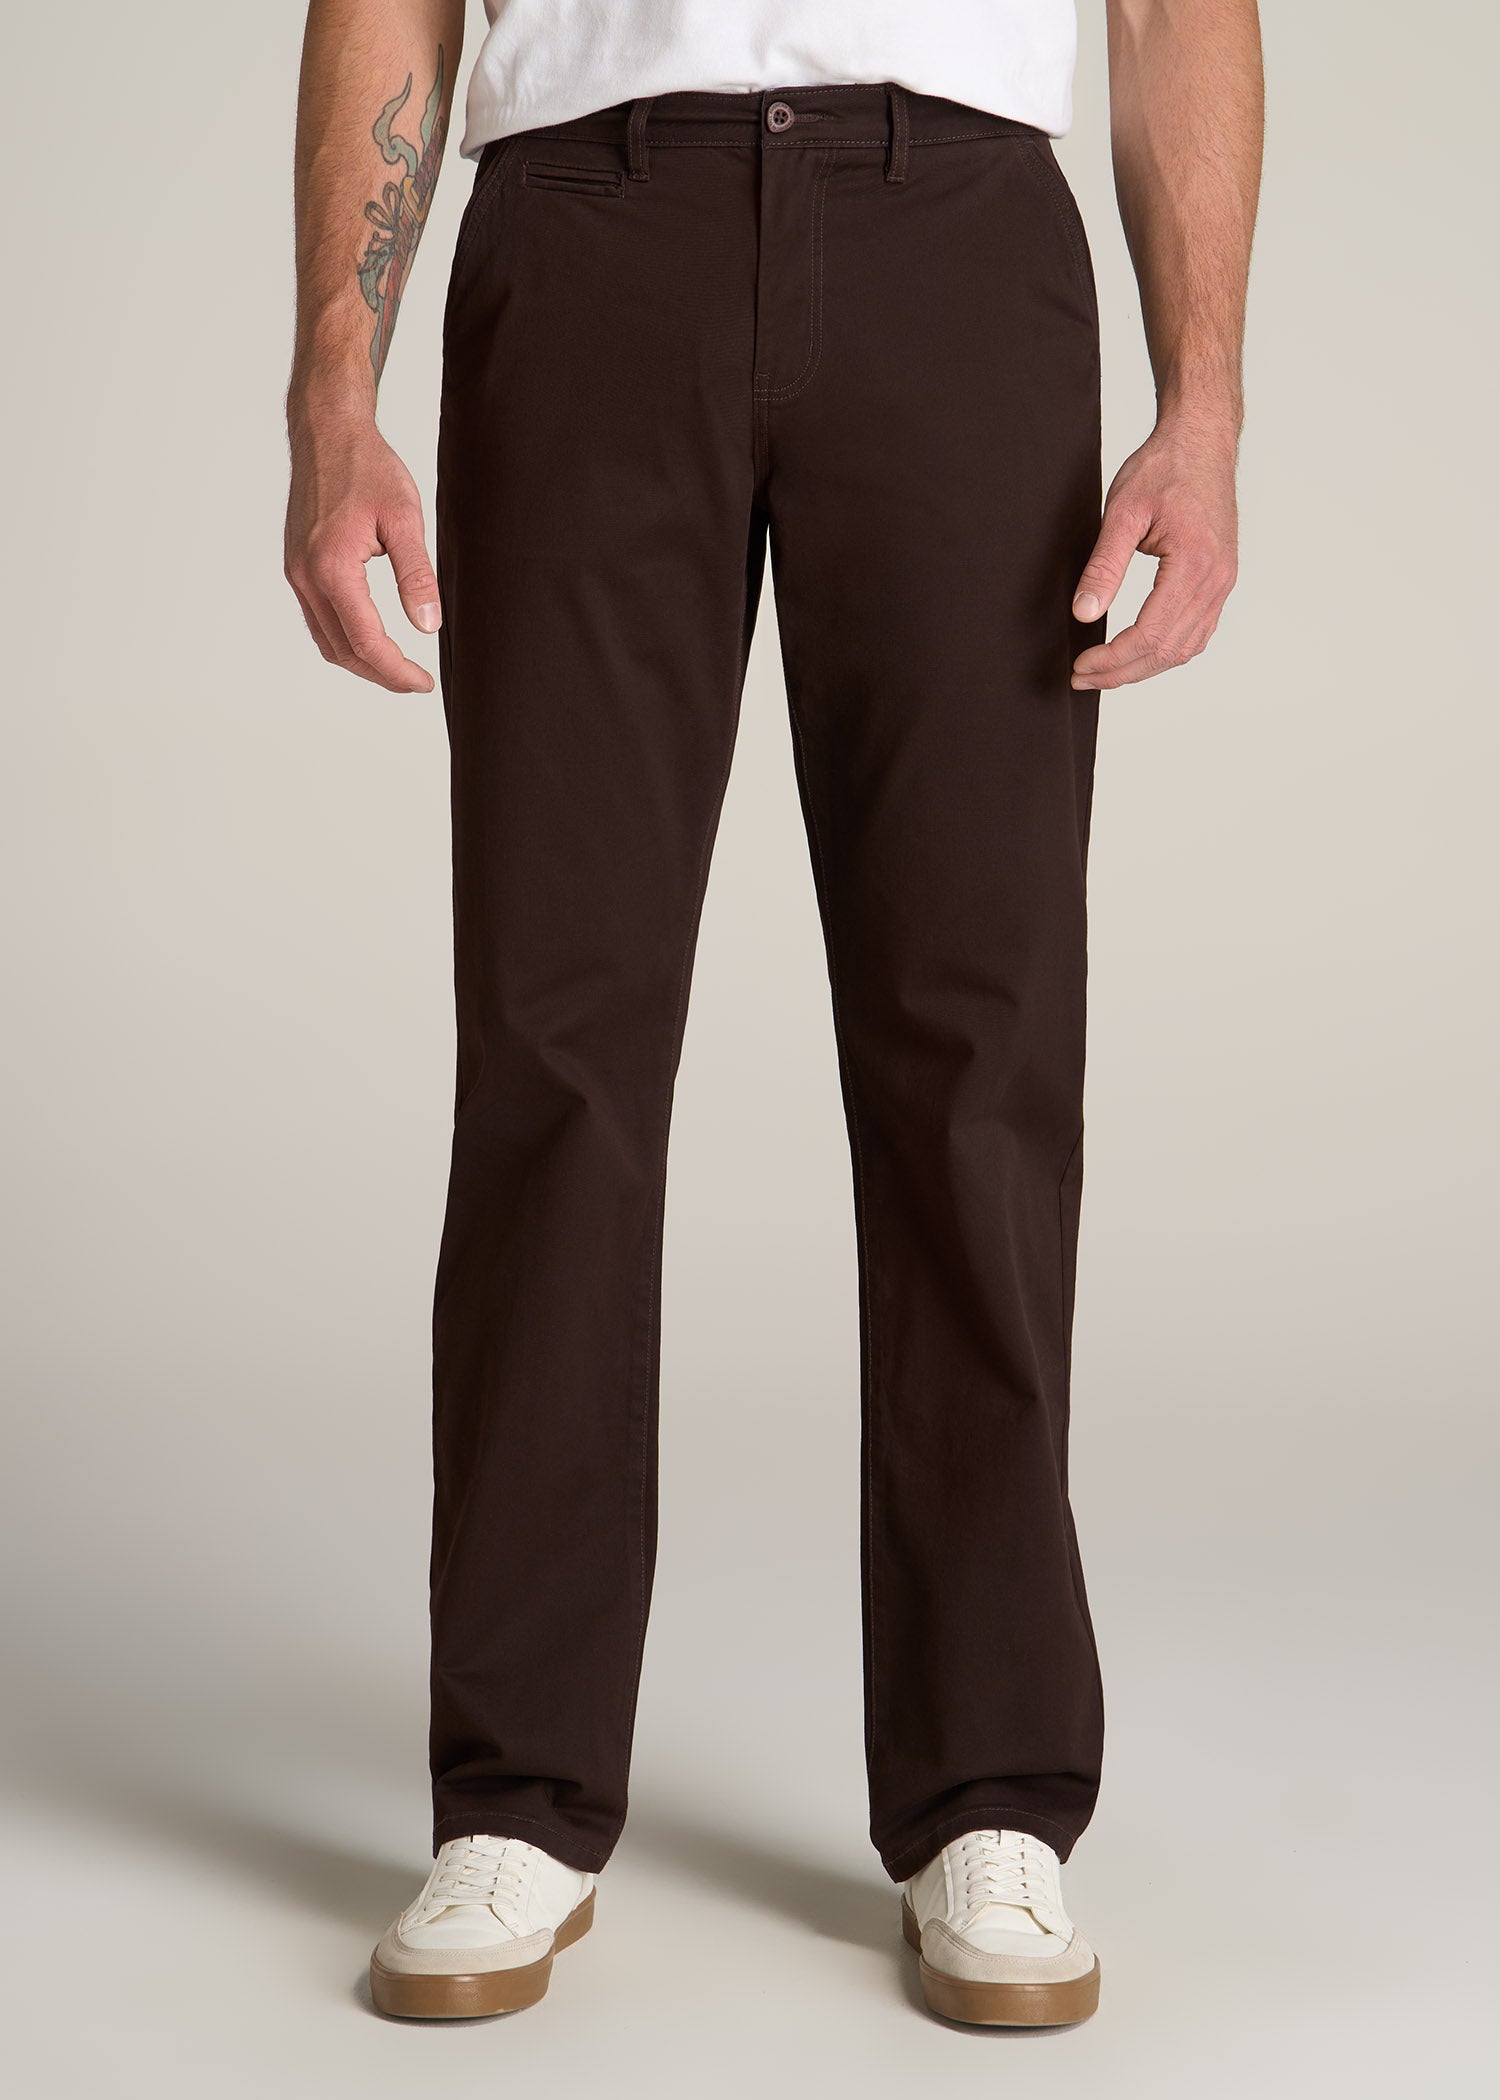 Mason SEMI-RELAXED Chinos in Chocolate - Pants for Tall Men